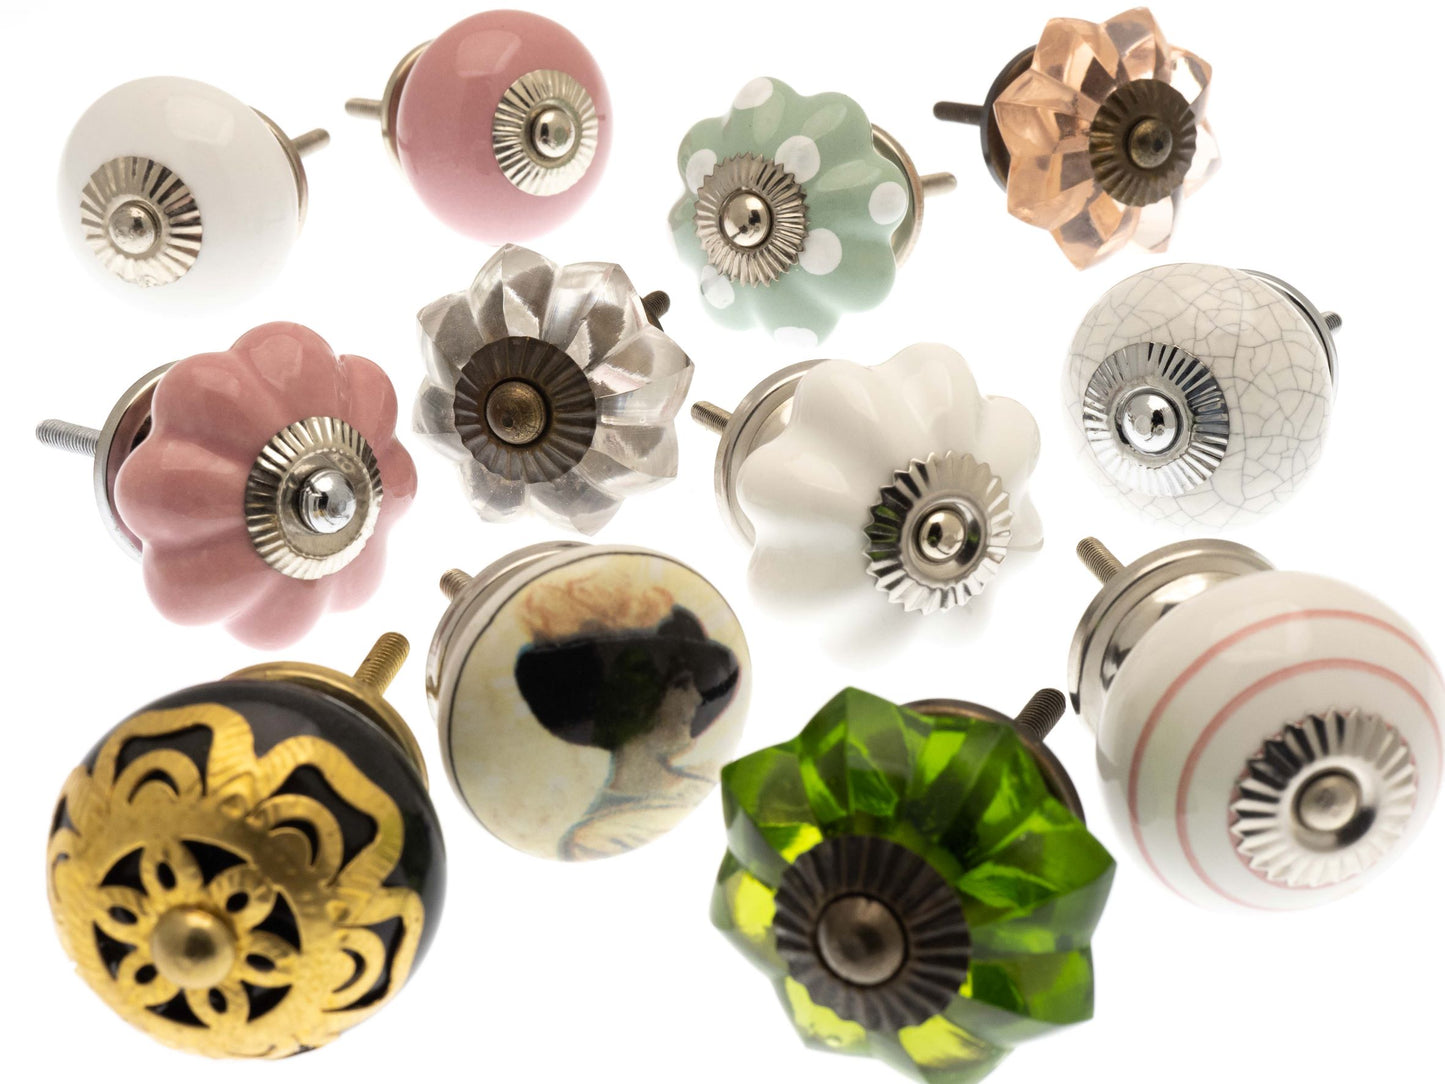 Ceramic Cupboard Door Knobs with Pretty Vintage Style Glass - Set of 12